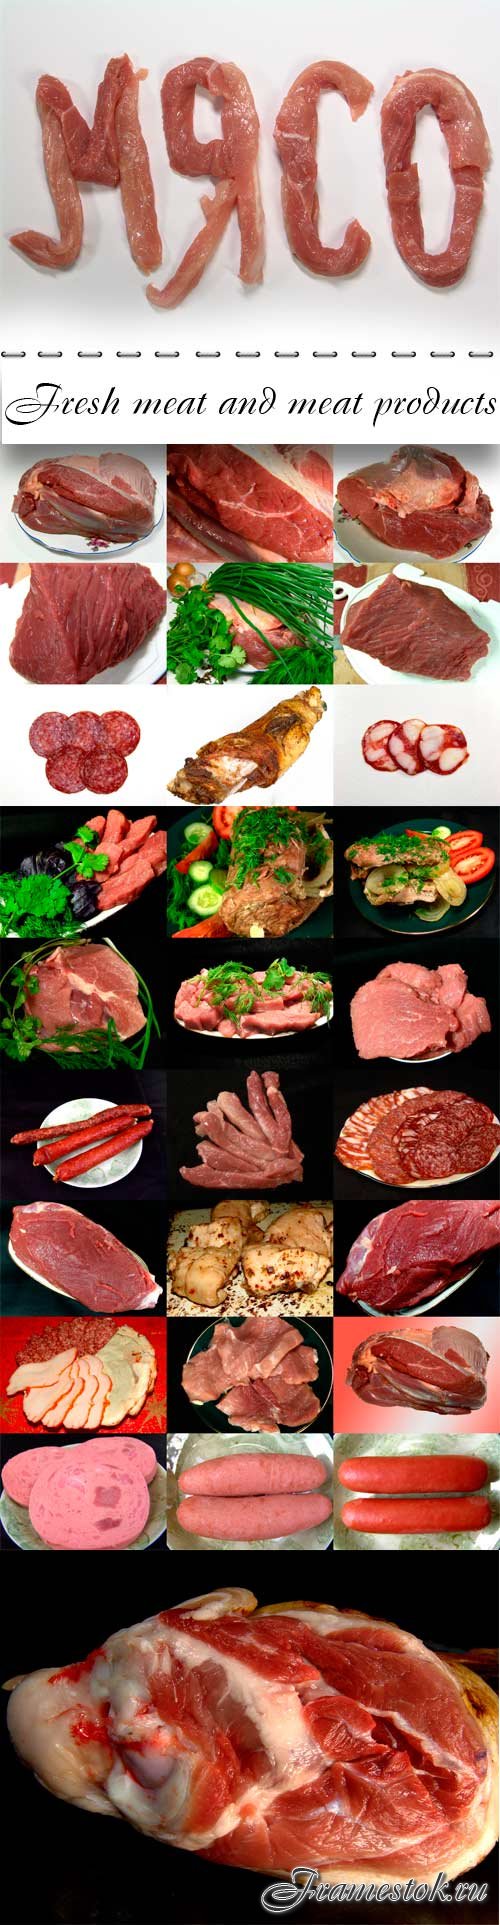 Fresh meat and meat products